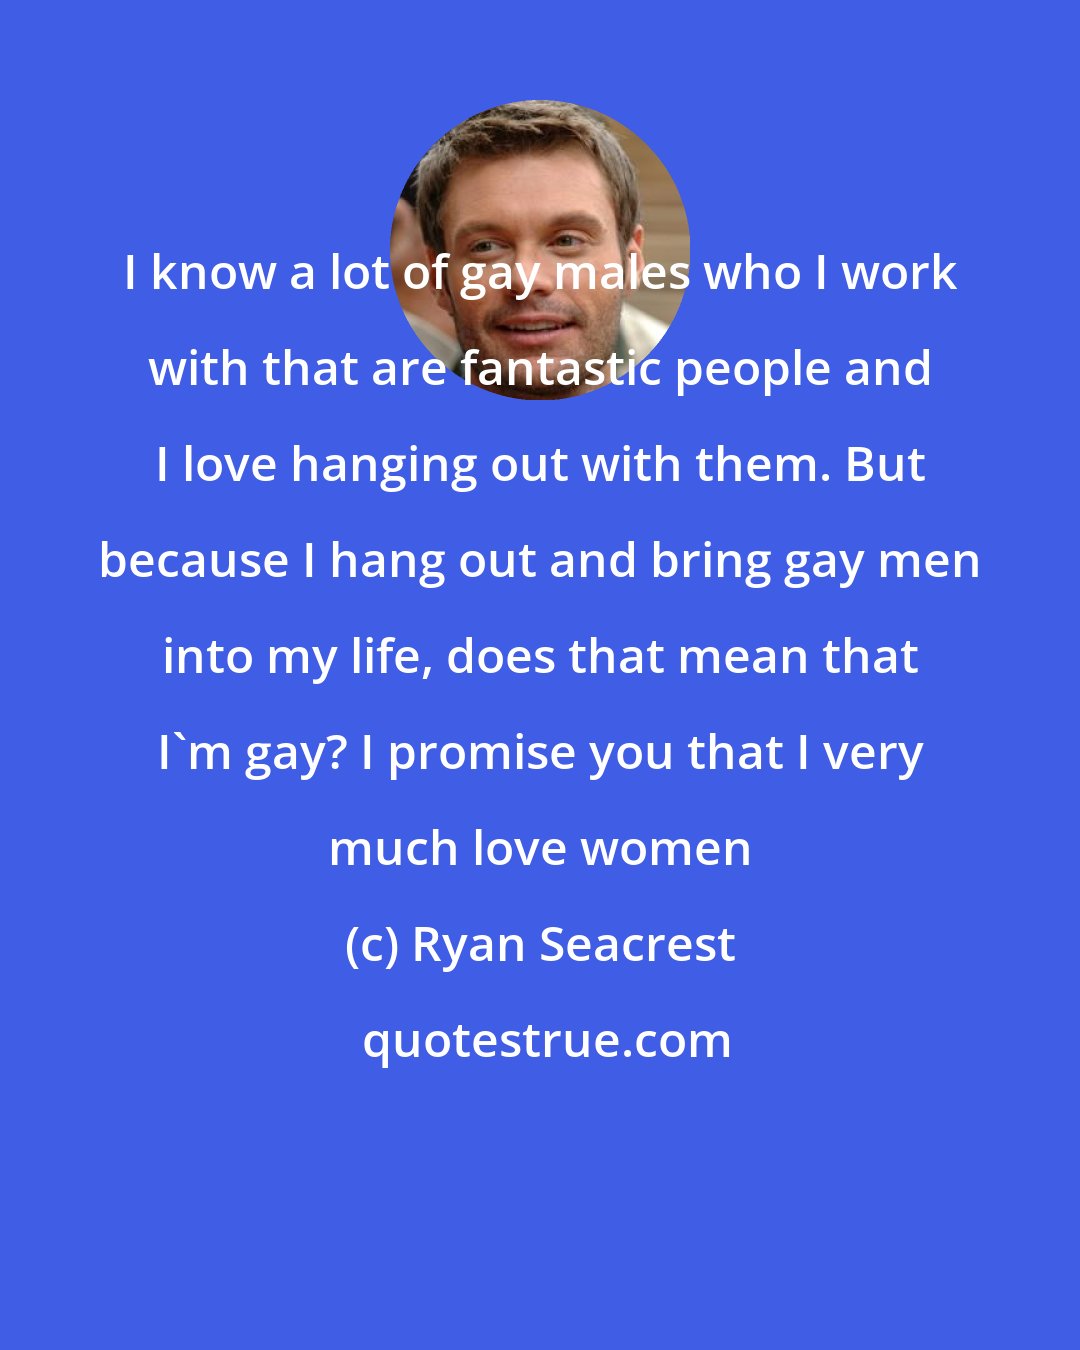 Ryan Seacrest: I know a lot of gay males who I work with that are fantastic people and I love hanging out with them. But because I hang out and bring gay men into my life, does that mean that I'm gay? I promise you that I very much love women